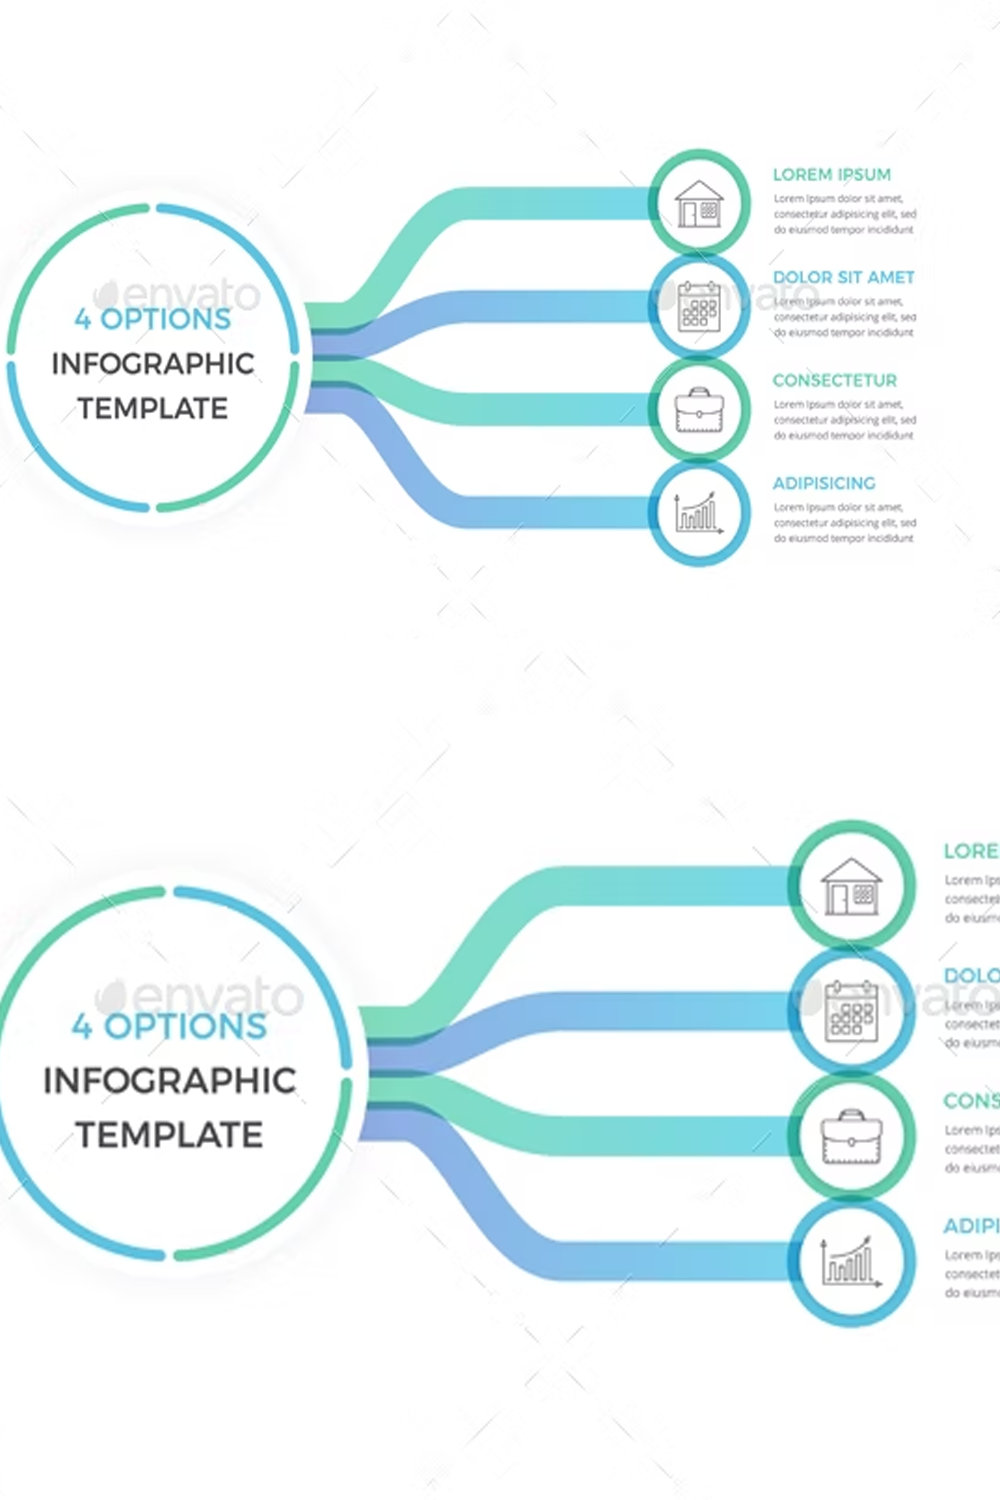 Illustrations infographic template with 3 options of pinterest.